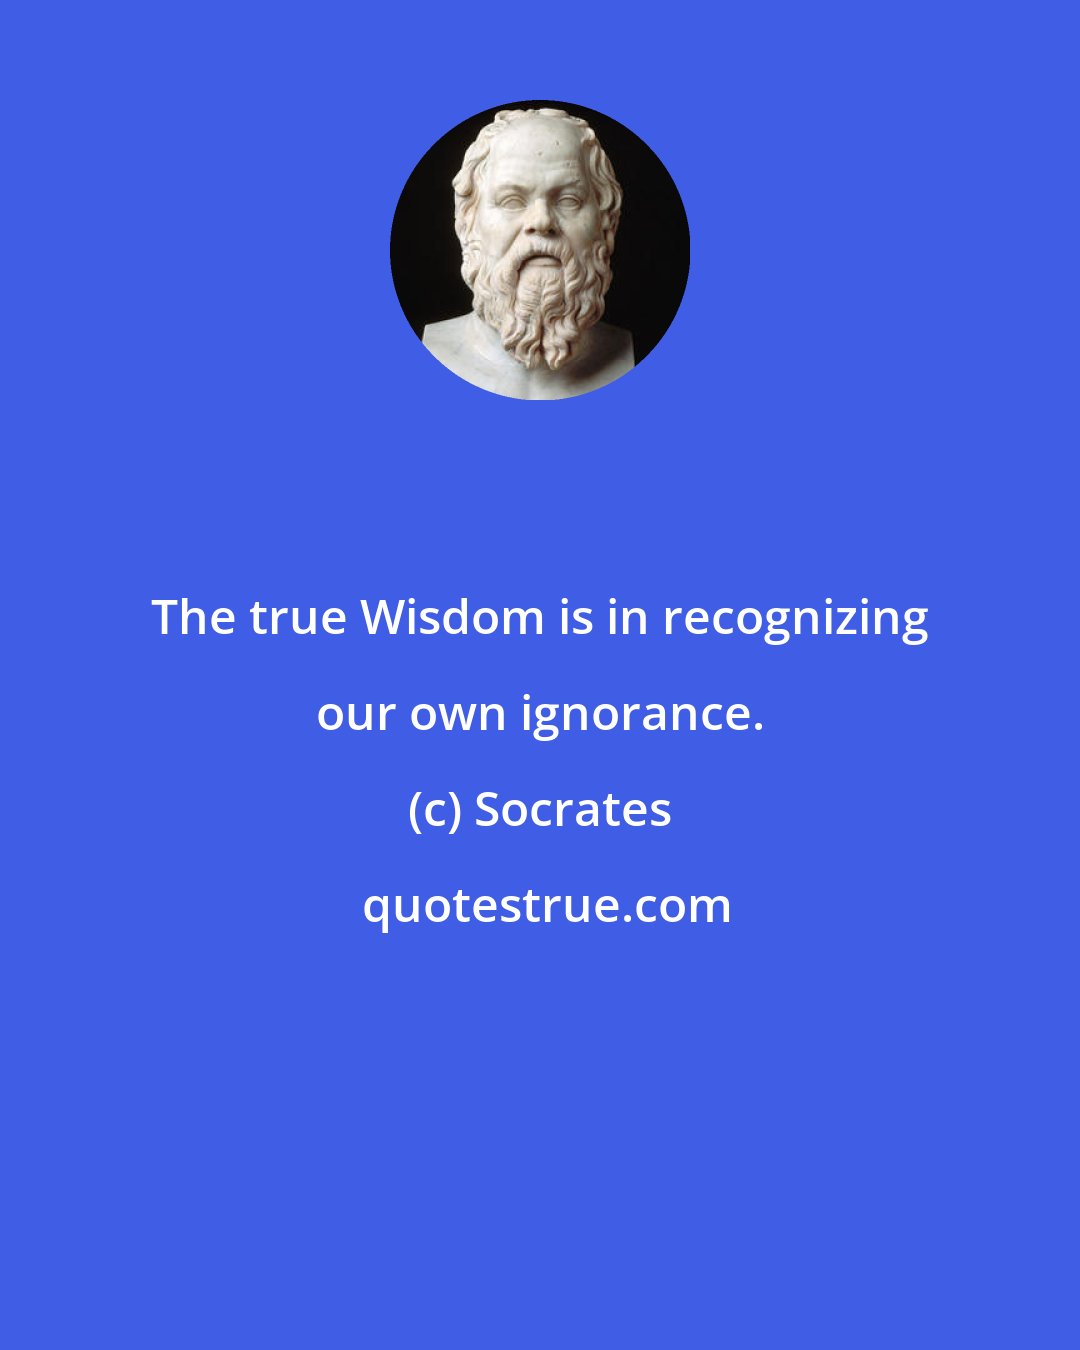 Socrates: The true Wisdom is in recognizing our own ignorance.